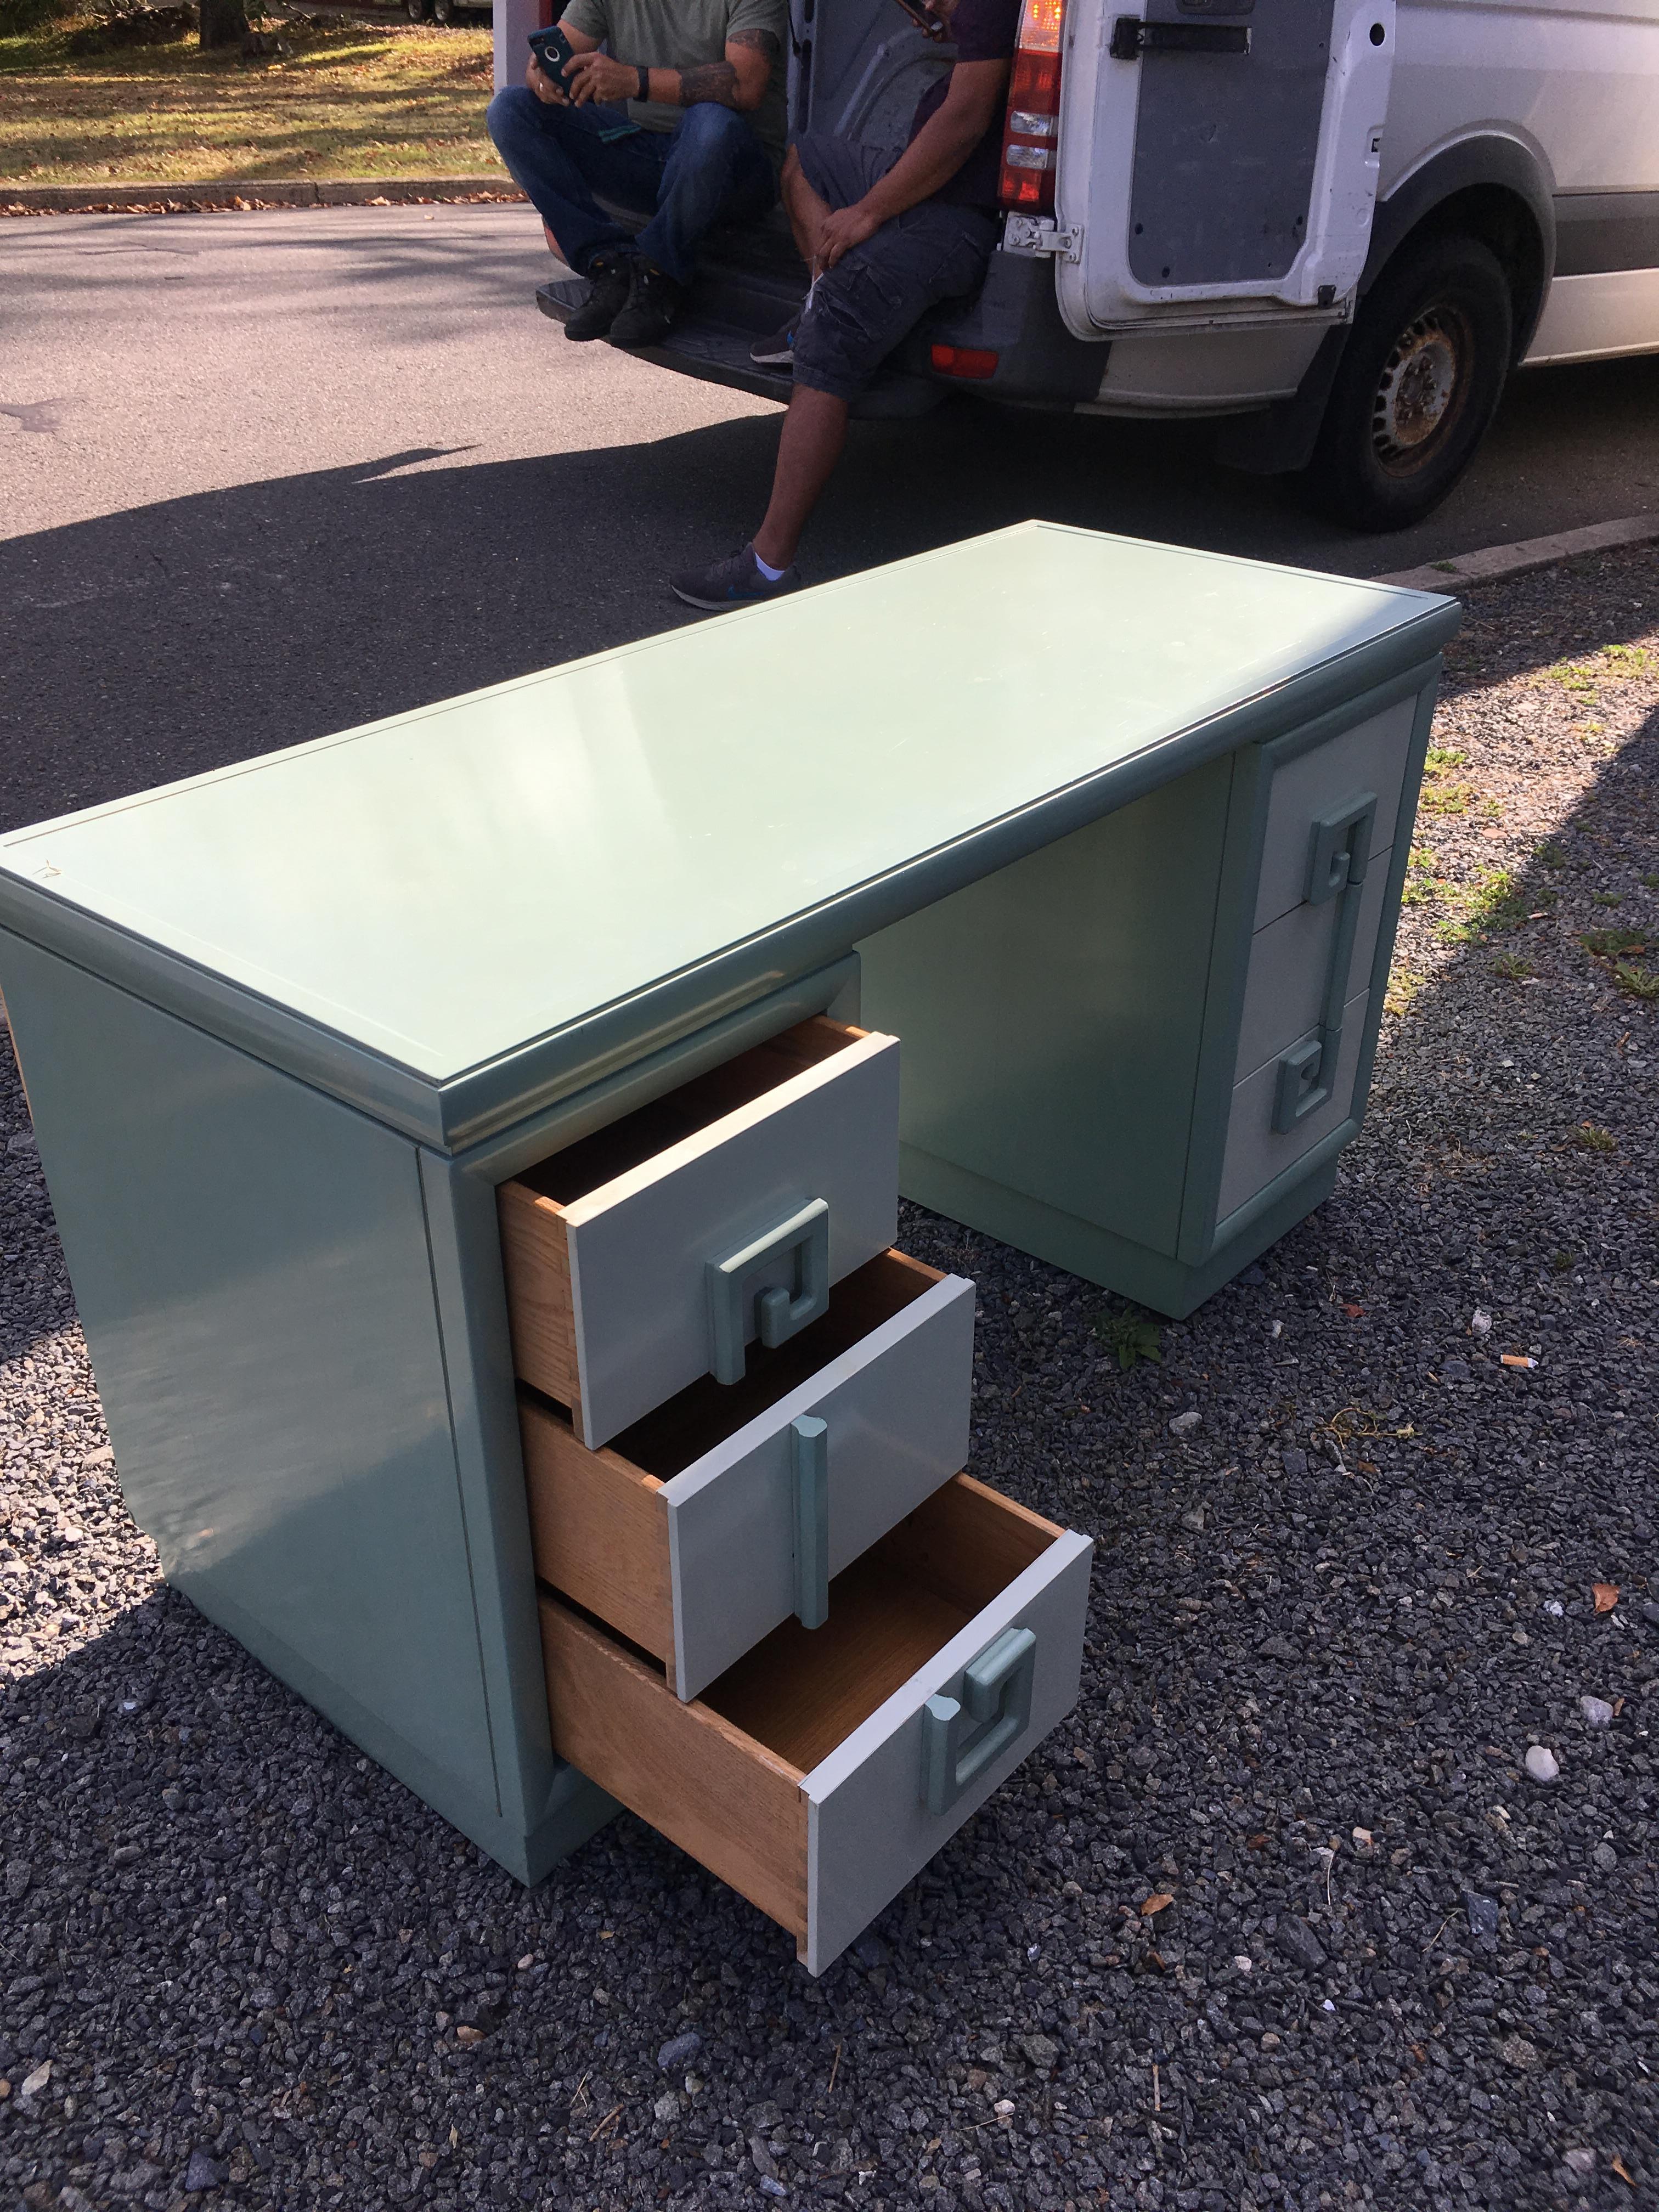 A glamorous painted vanity in Seafoam green and white having stylish Greek key inspired pulls on the 3 stacked drawers right and left. There's a matching stool and mirror also available, price upon request.
Measures: Seat 18 x 19. Mirror 35 1/2 x